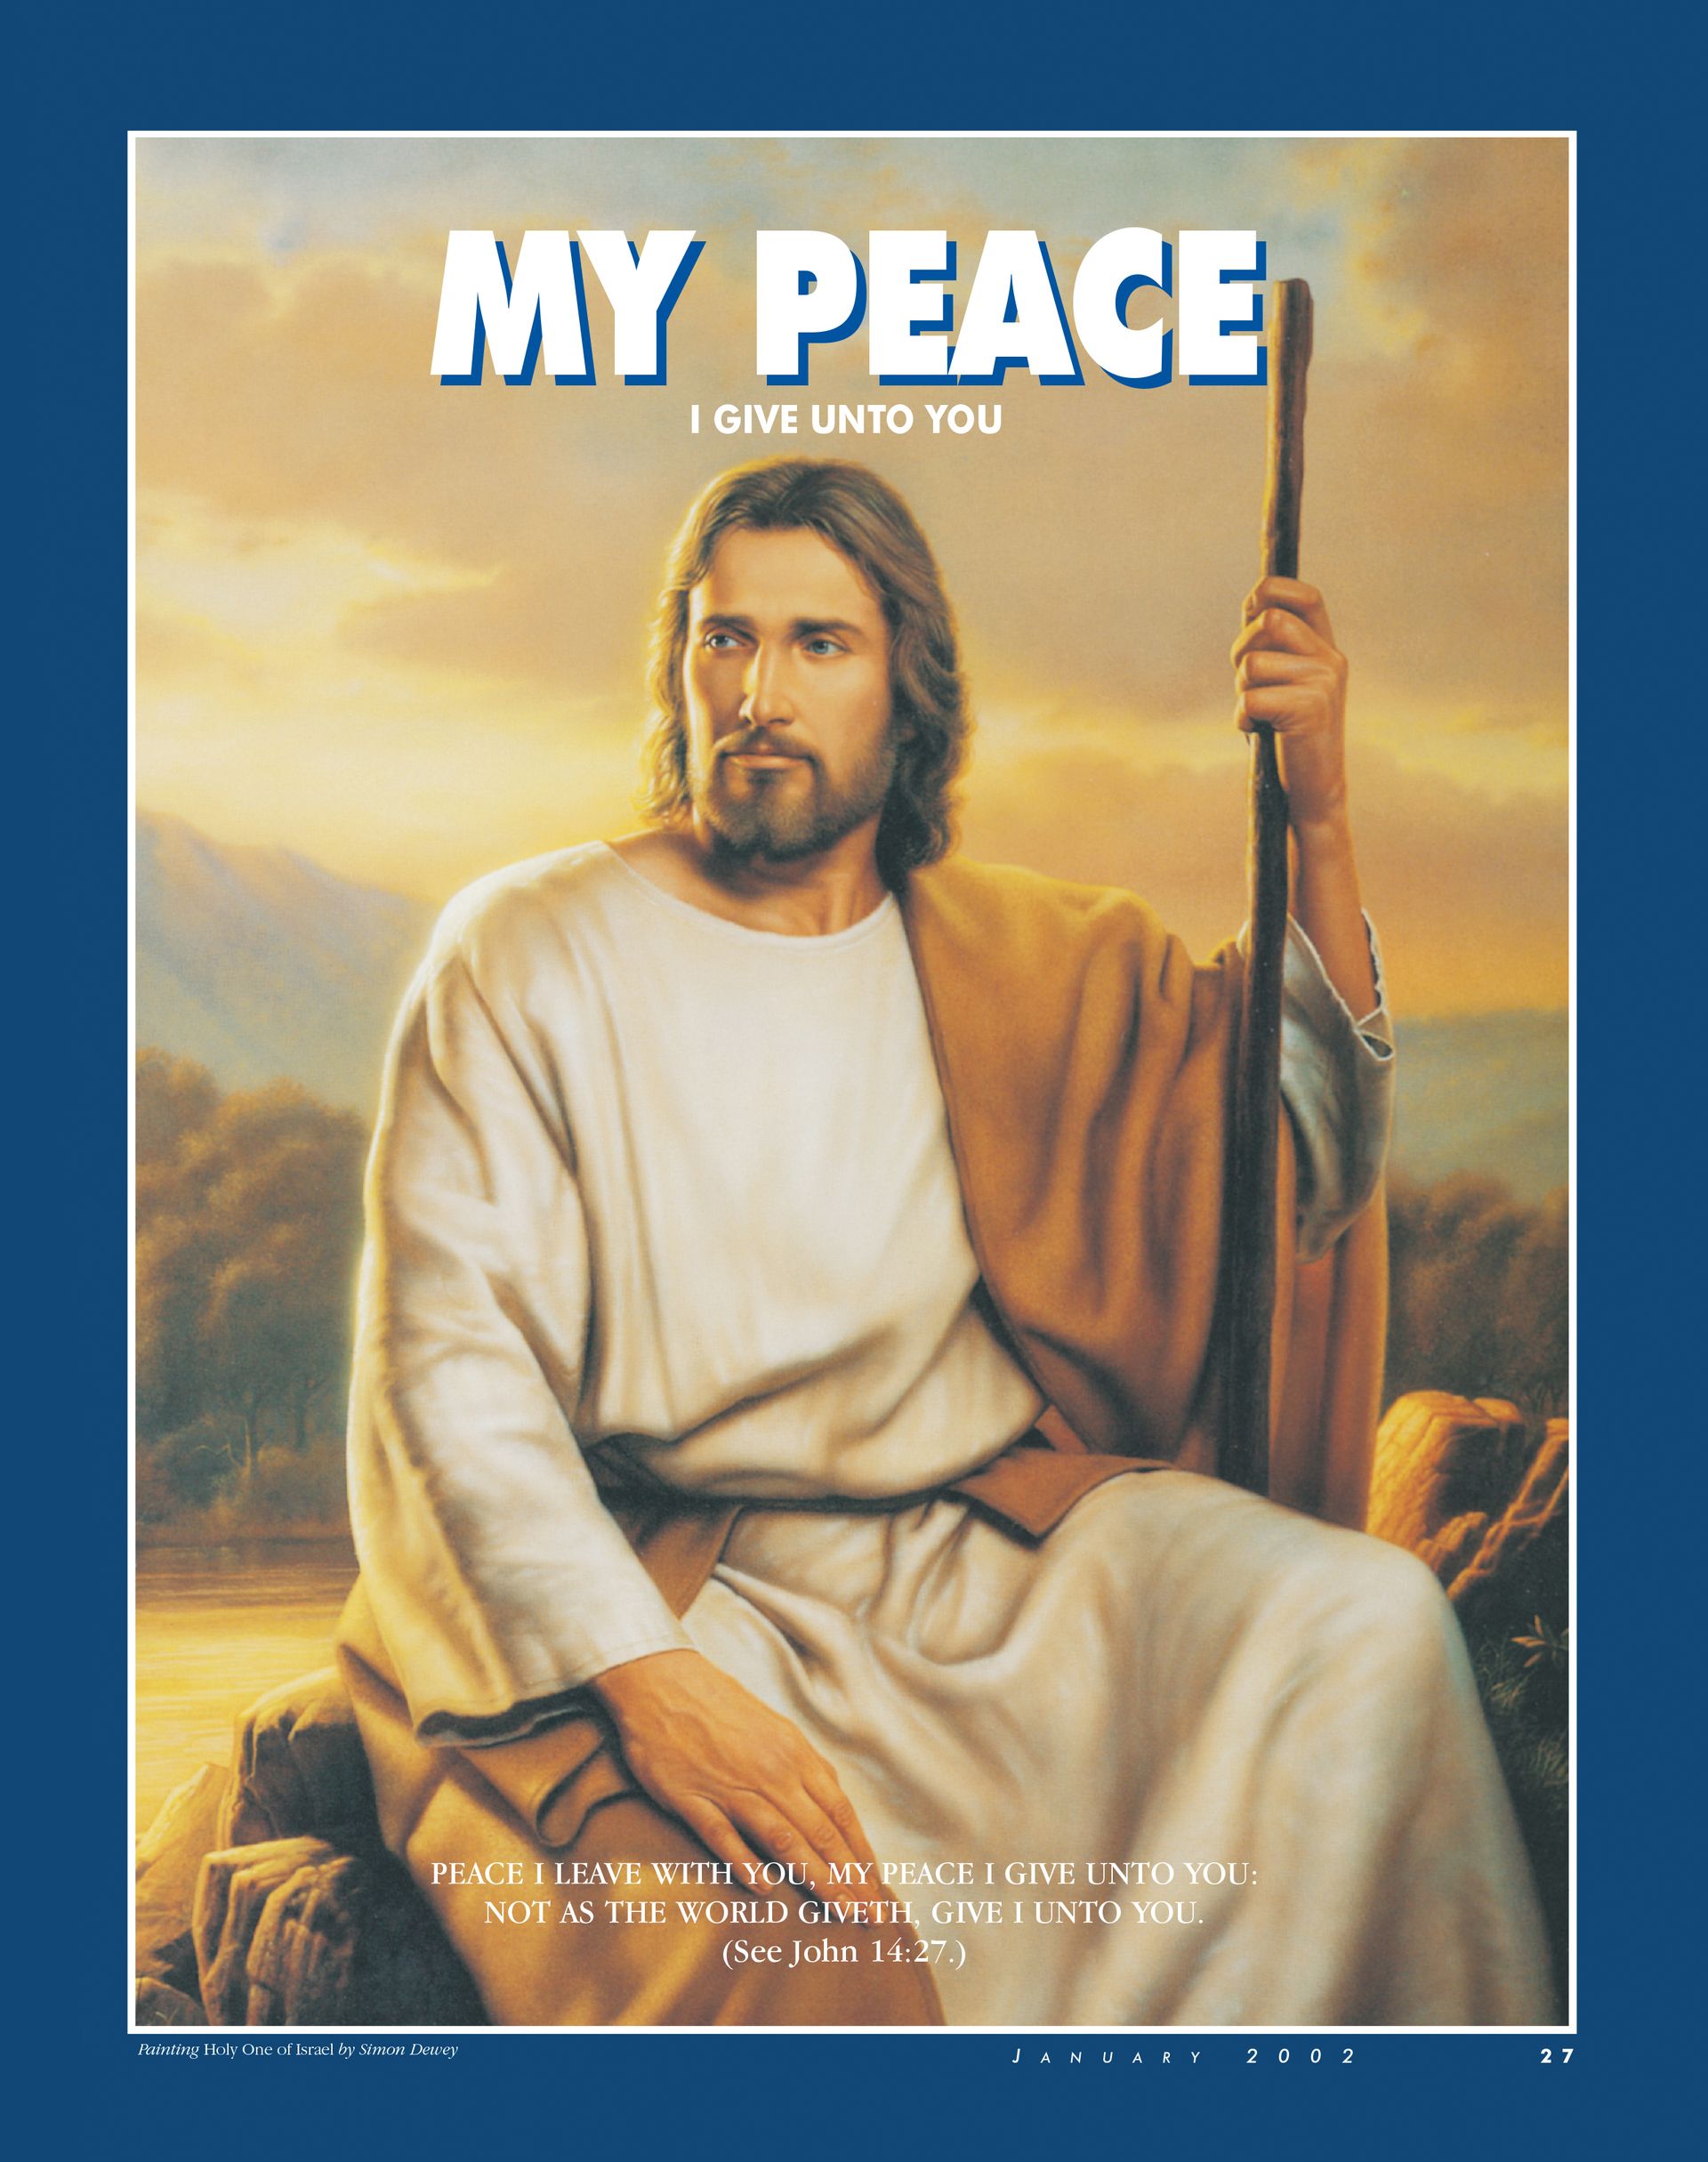 My Peace I Give unto You. “Peace I leave with you, my peace I give unto you: not as the world giveth, give I unto you.” (See John 14:27.) Jan. 2002 © undefined ipCode 1.